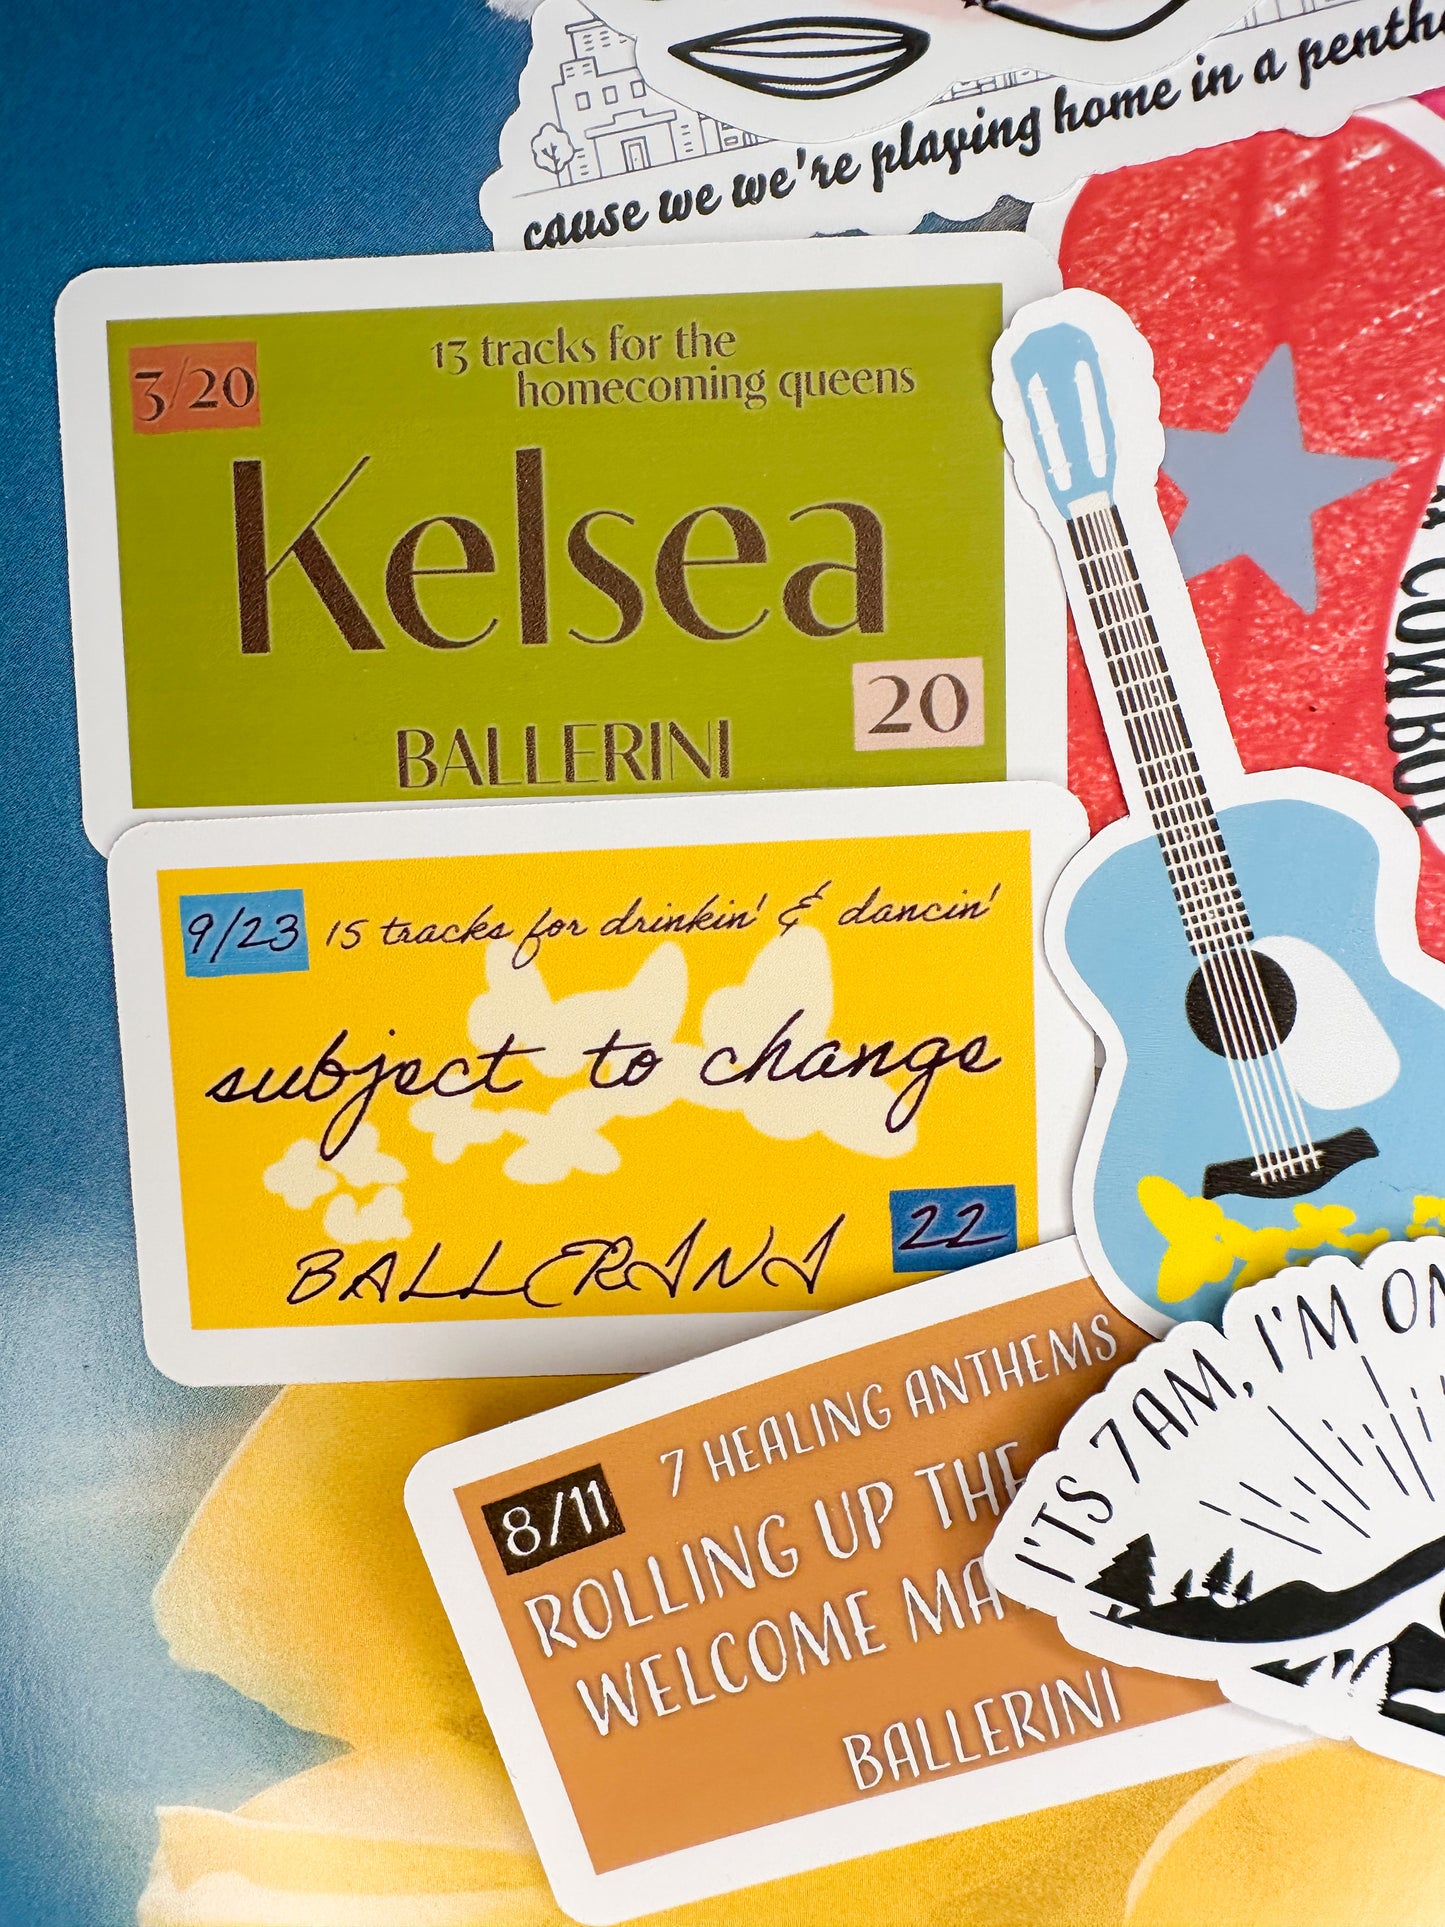 21 Kelsea Ballerini stickers | Subject to change, rolling up the welcome mat (for good)